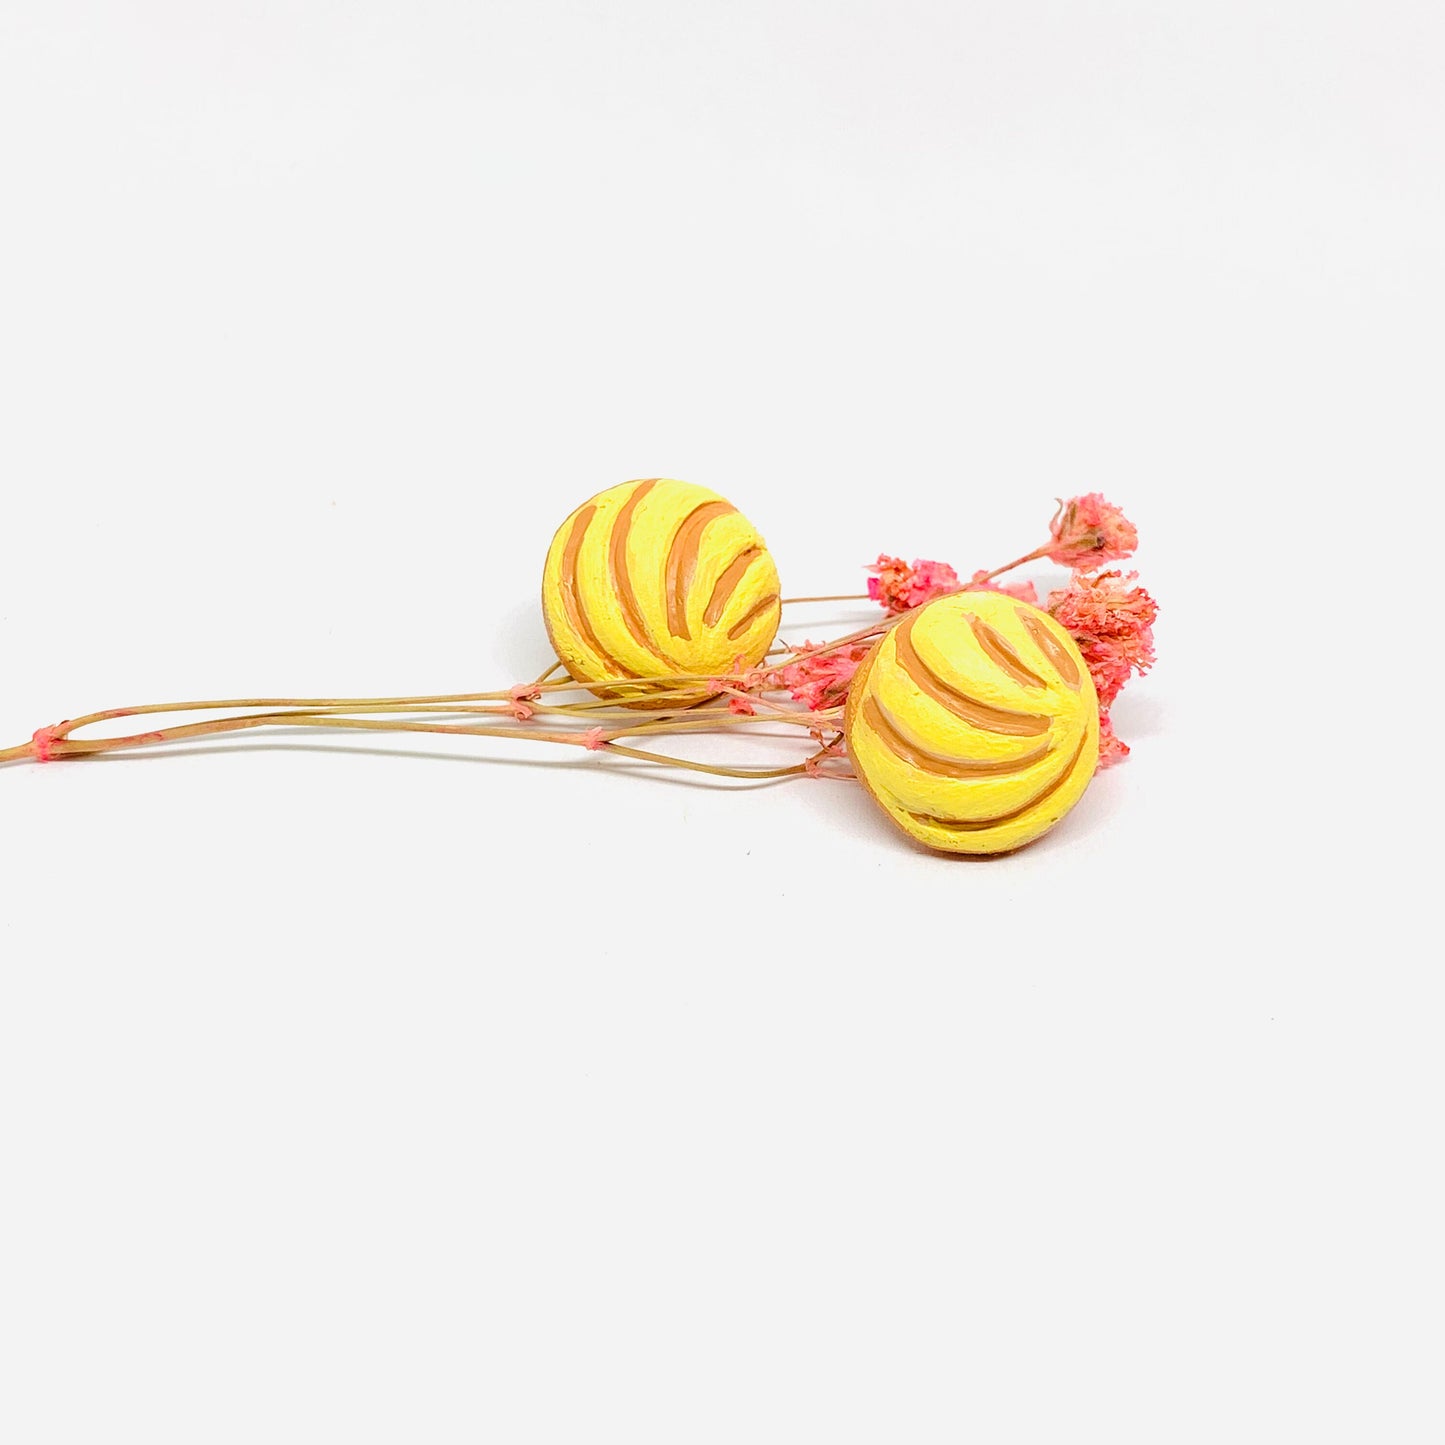 Yellow Concha Clay Earrings Mexican Food Jewelry Conchitas Minimalist Handmade HandPainted Girl Gift Summer Trendy Fashion Outdoor Aretes